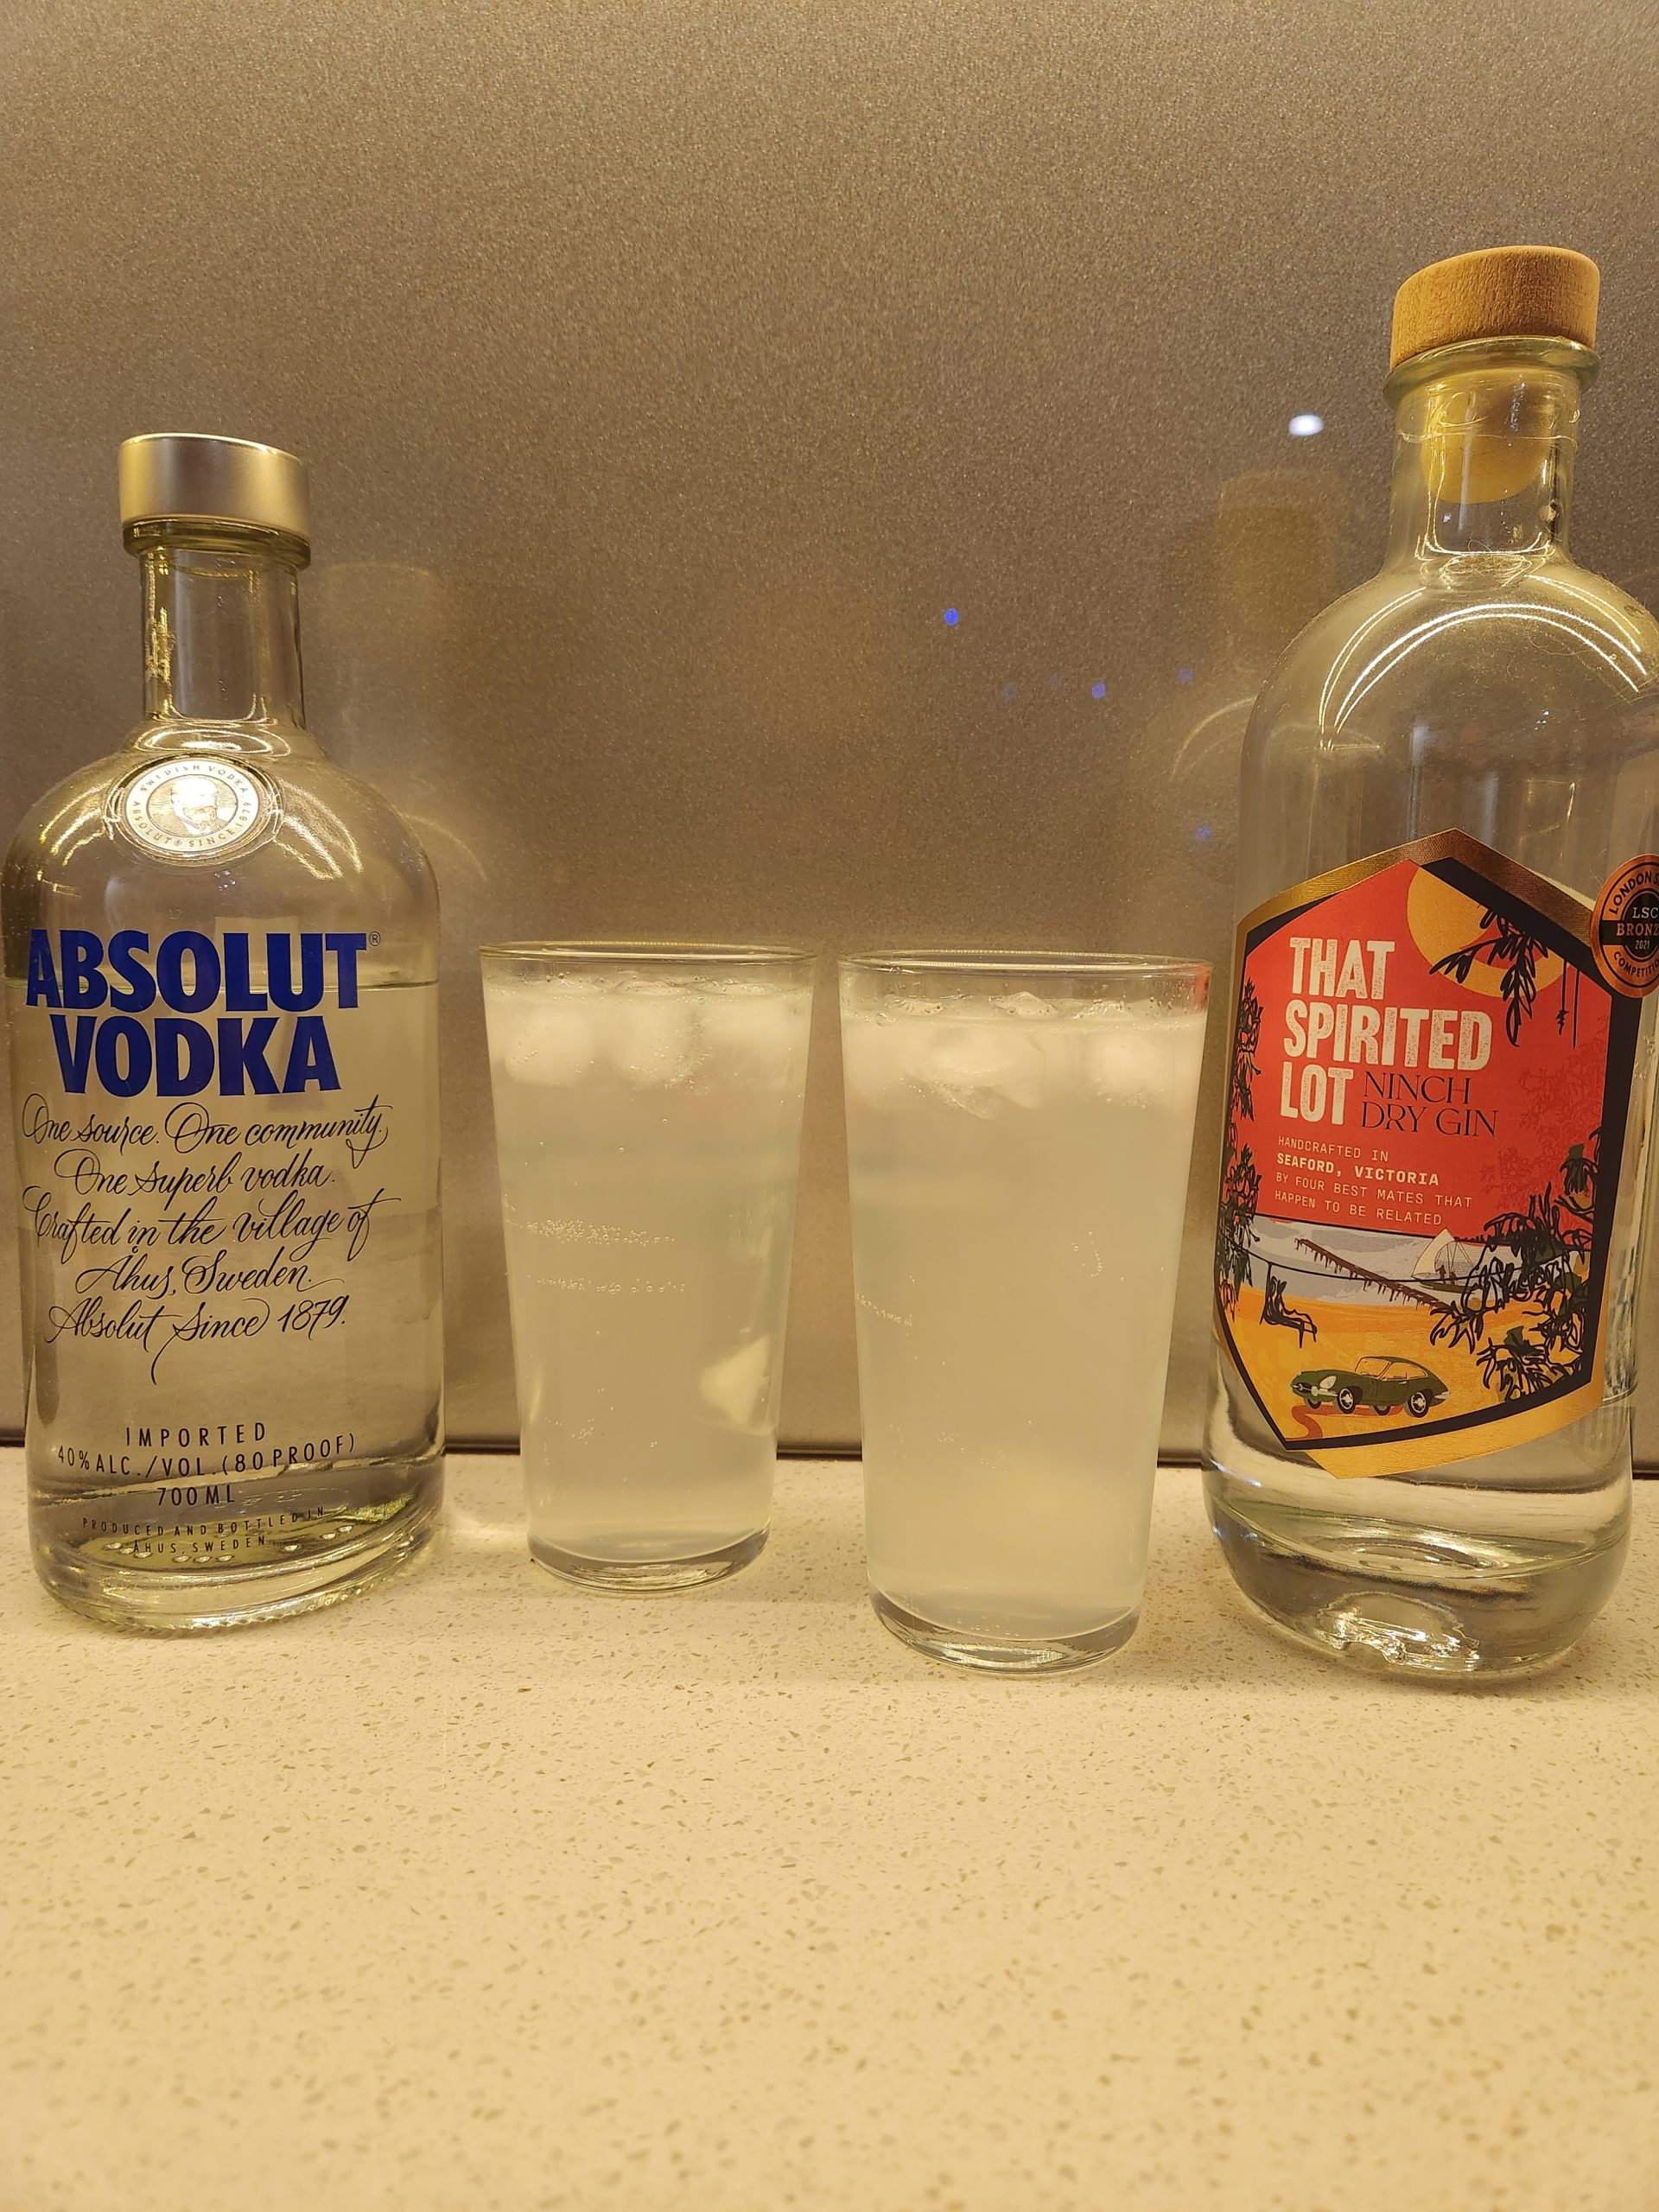 Two glasses of Kansas City Ice Water with a bottle of vodka and a bottle of gin.